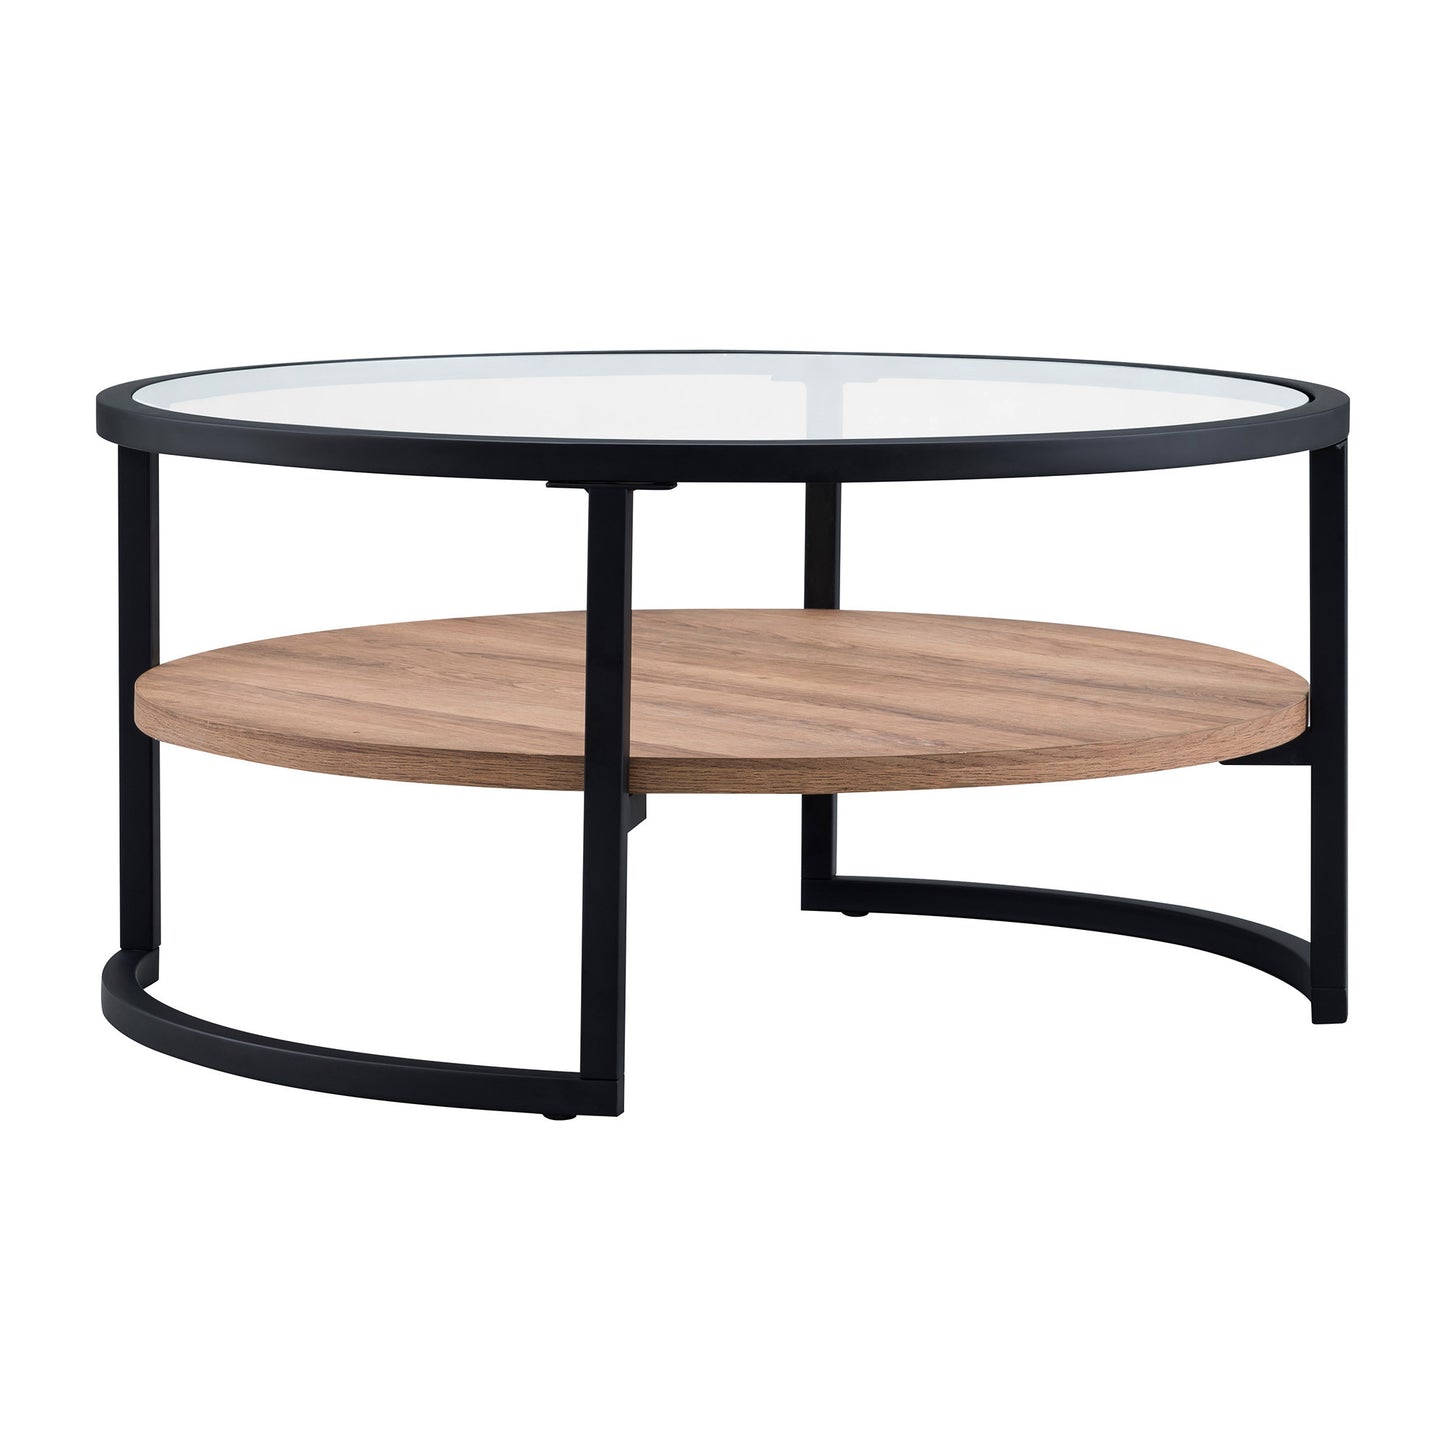 34" Black Brown and Glass Round Coffee Table With Shelf By Homeroots